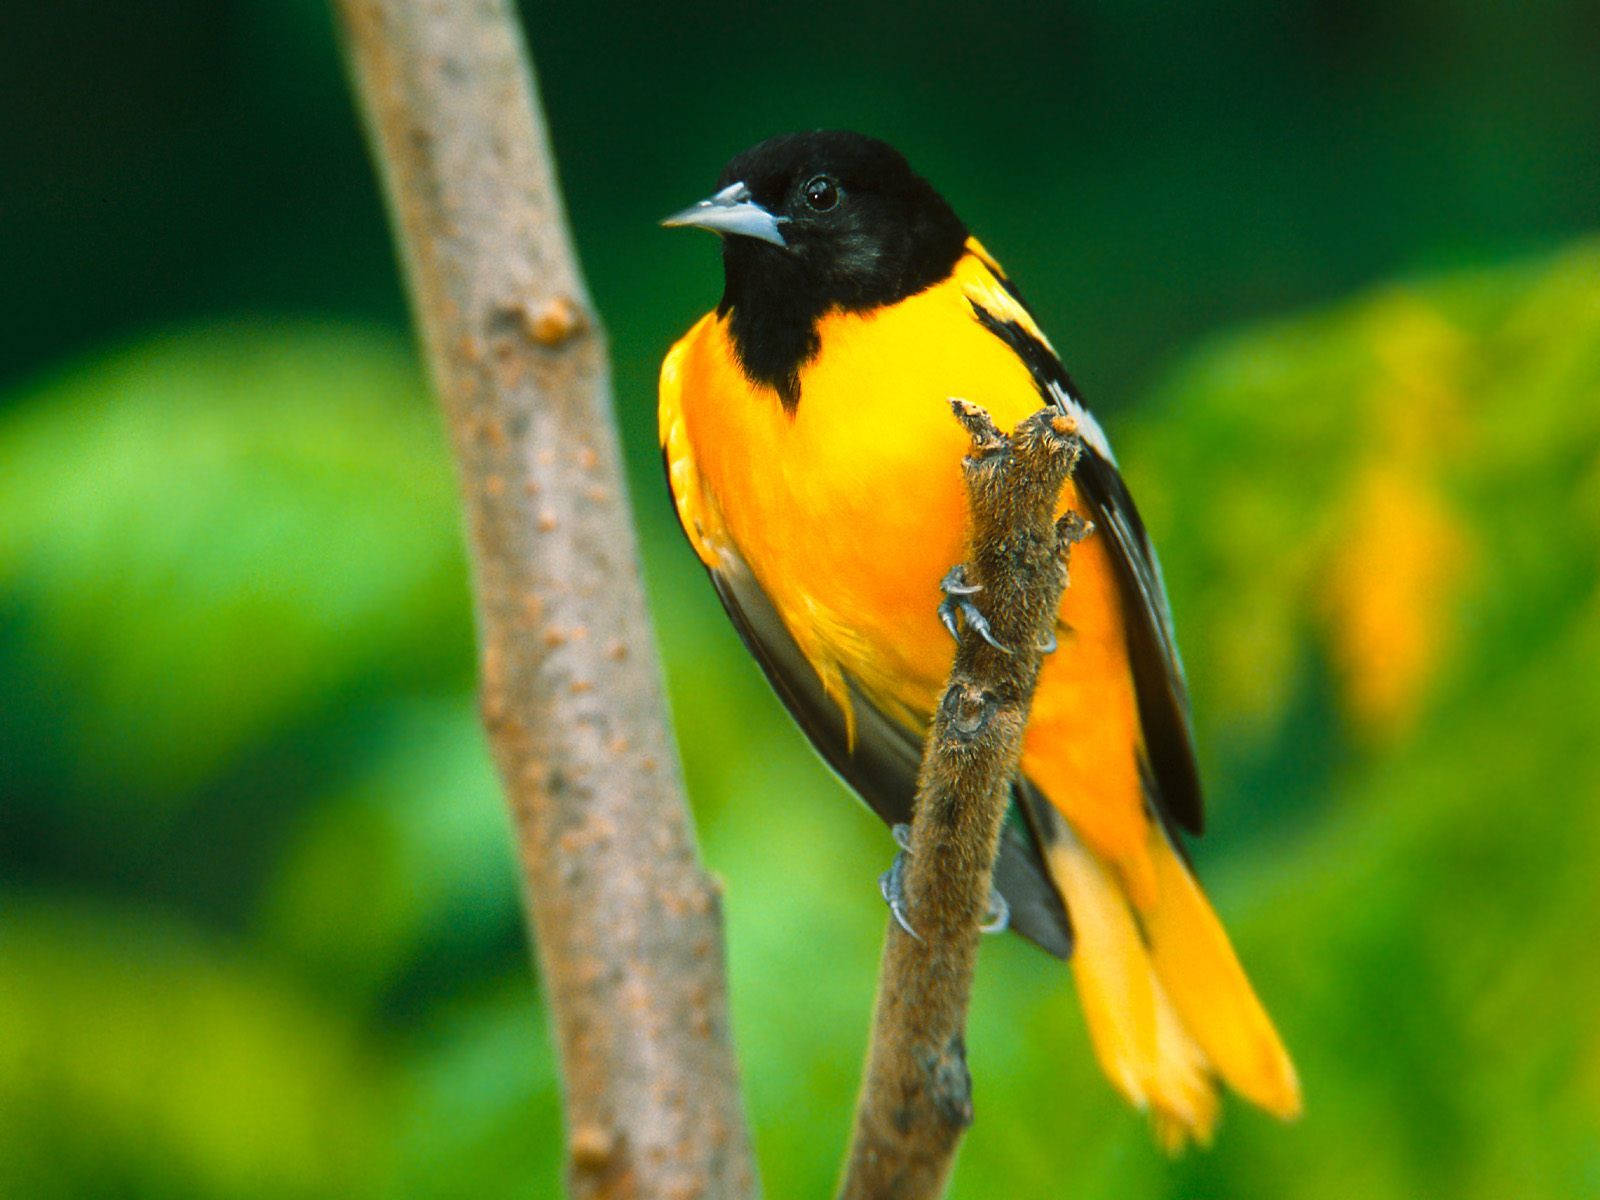 Vibrant Yellow Bird Perched In Nature